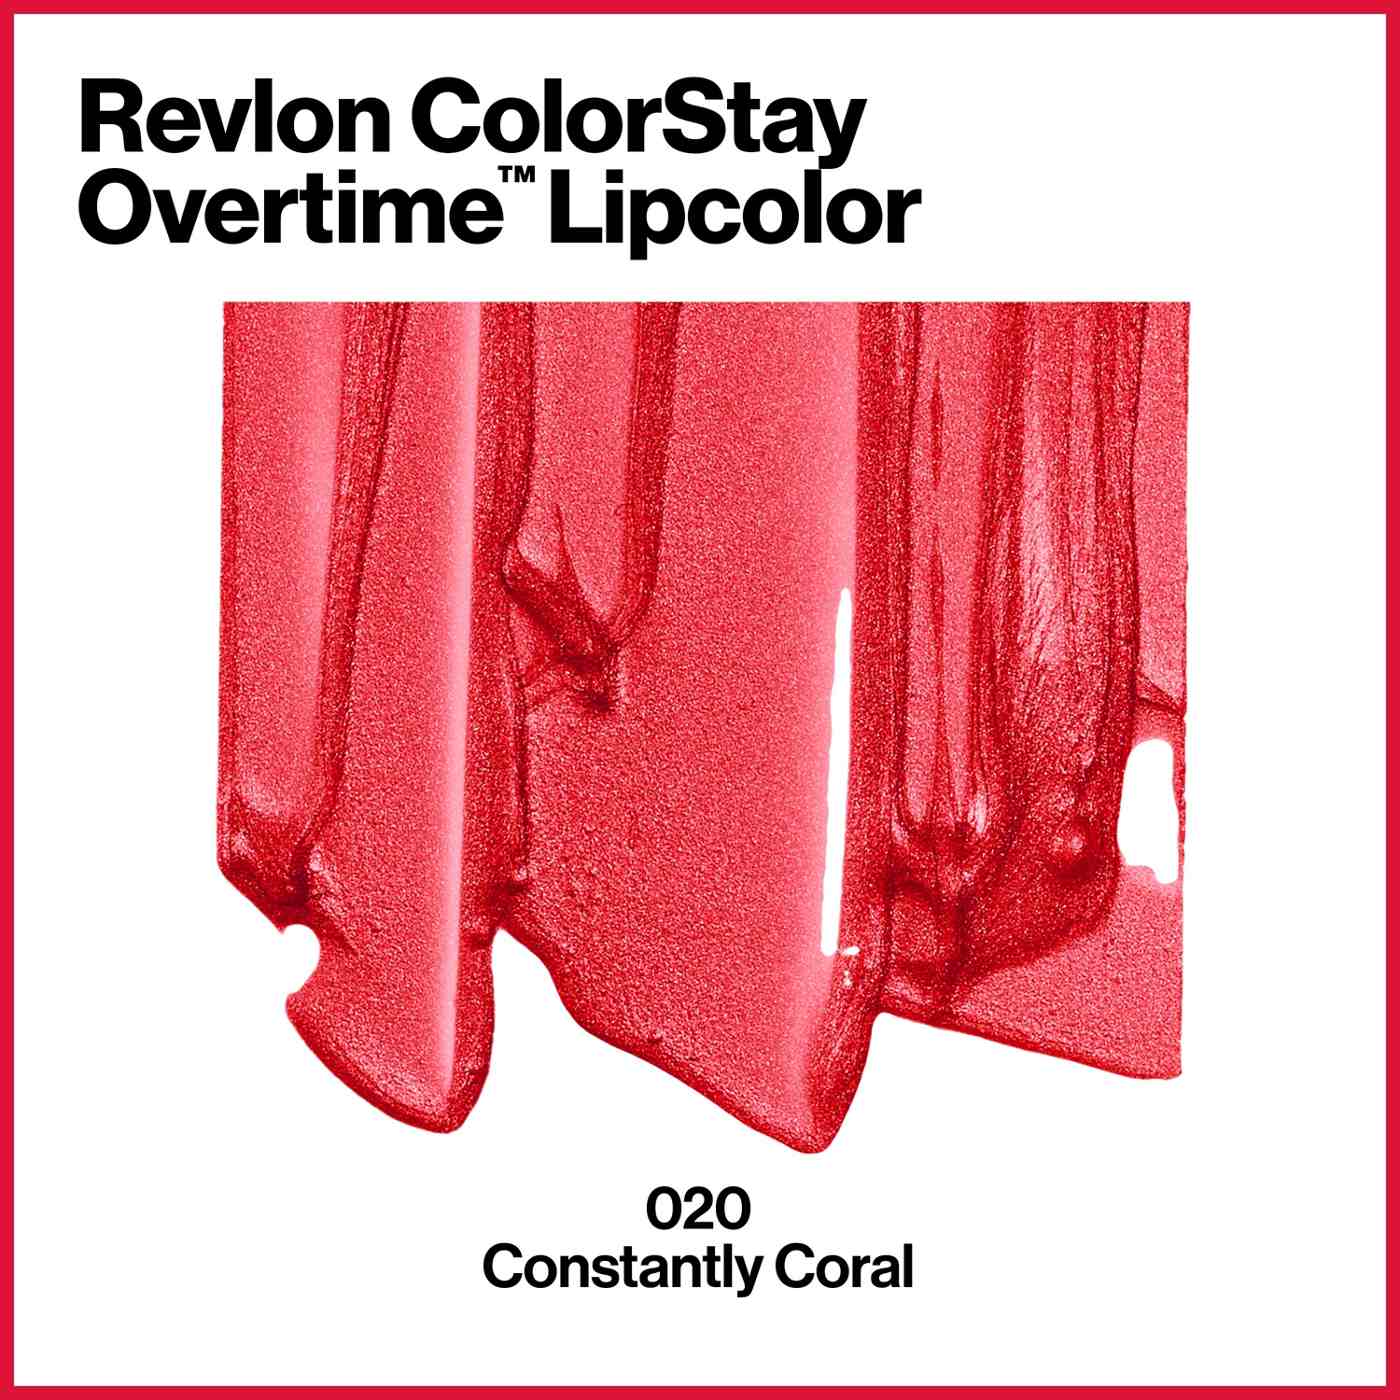 Revlon ColorStay Overtime Lipcolor, Long Wearing Liquid Lipstick, 020 Constantly Coral; image 4 of 7